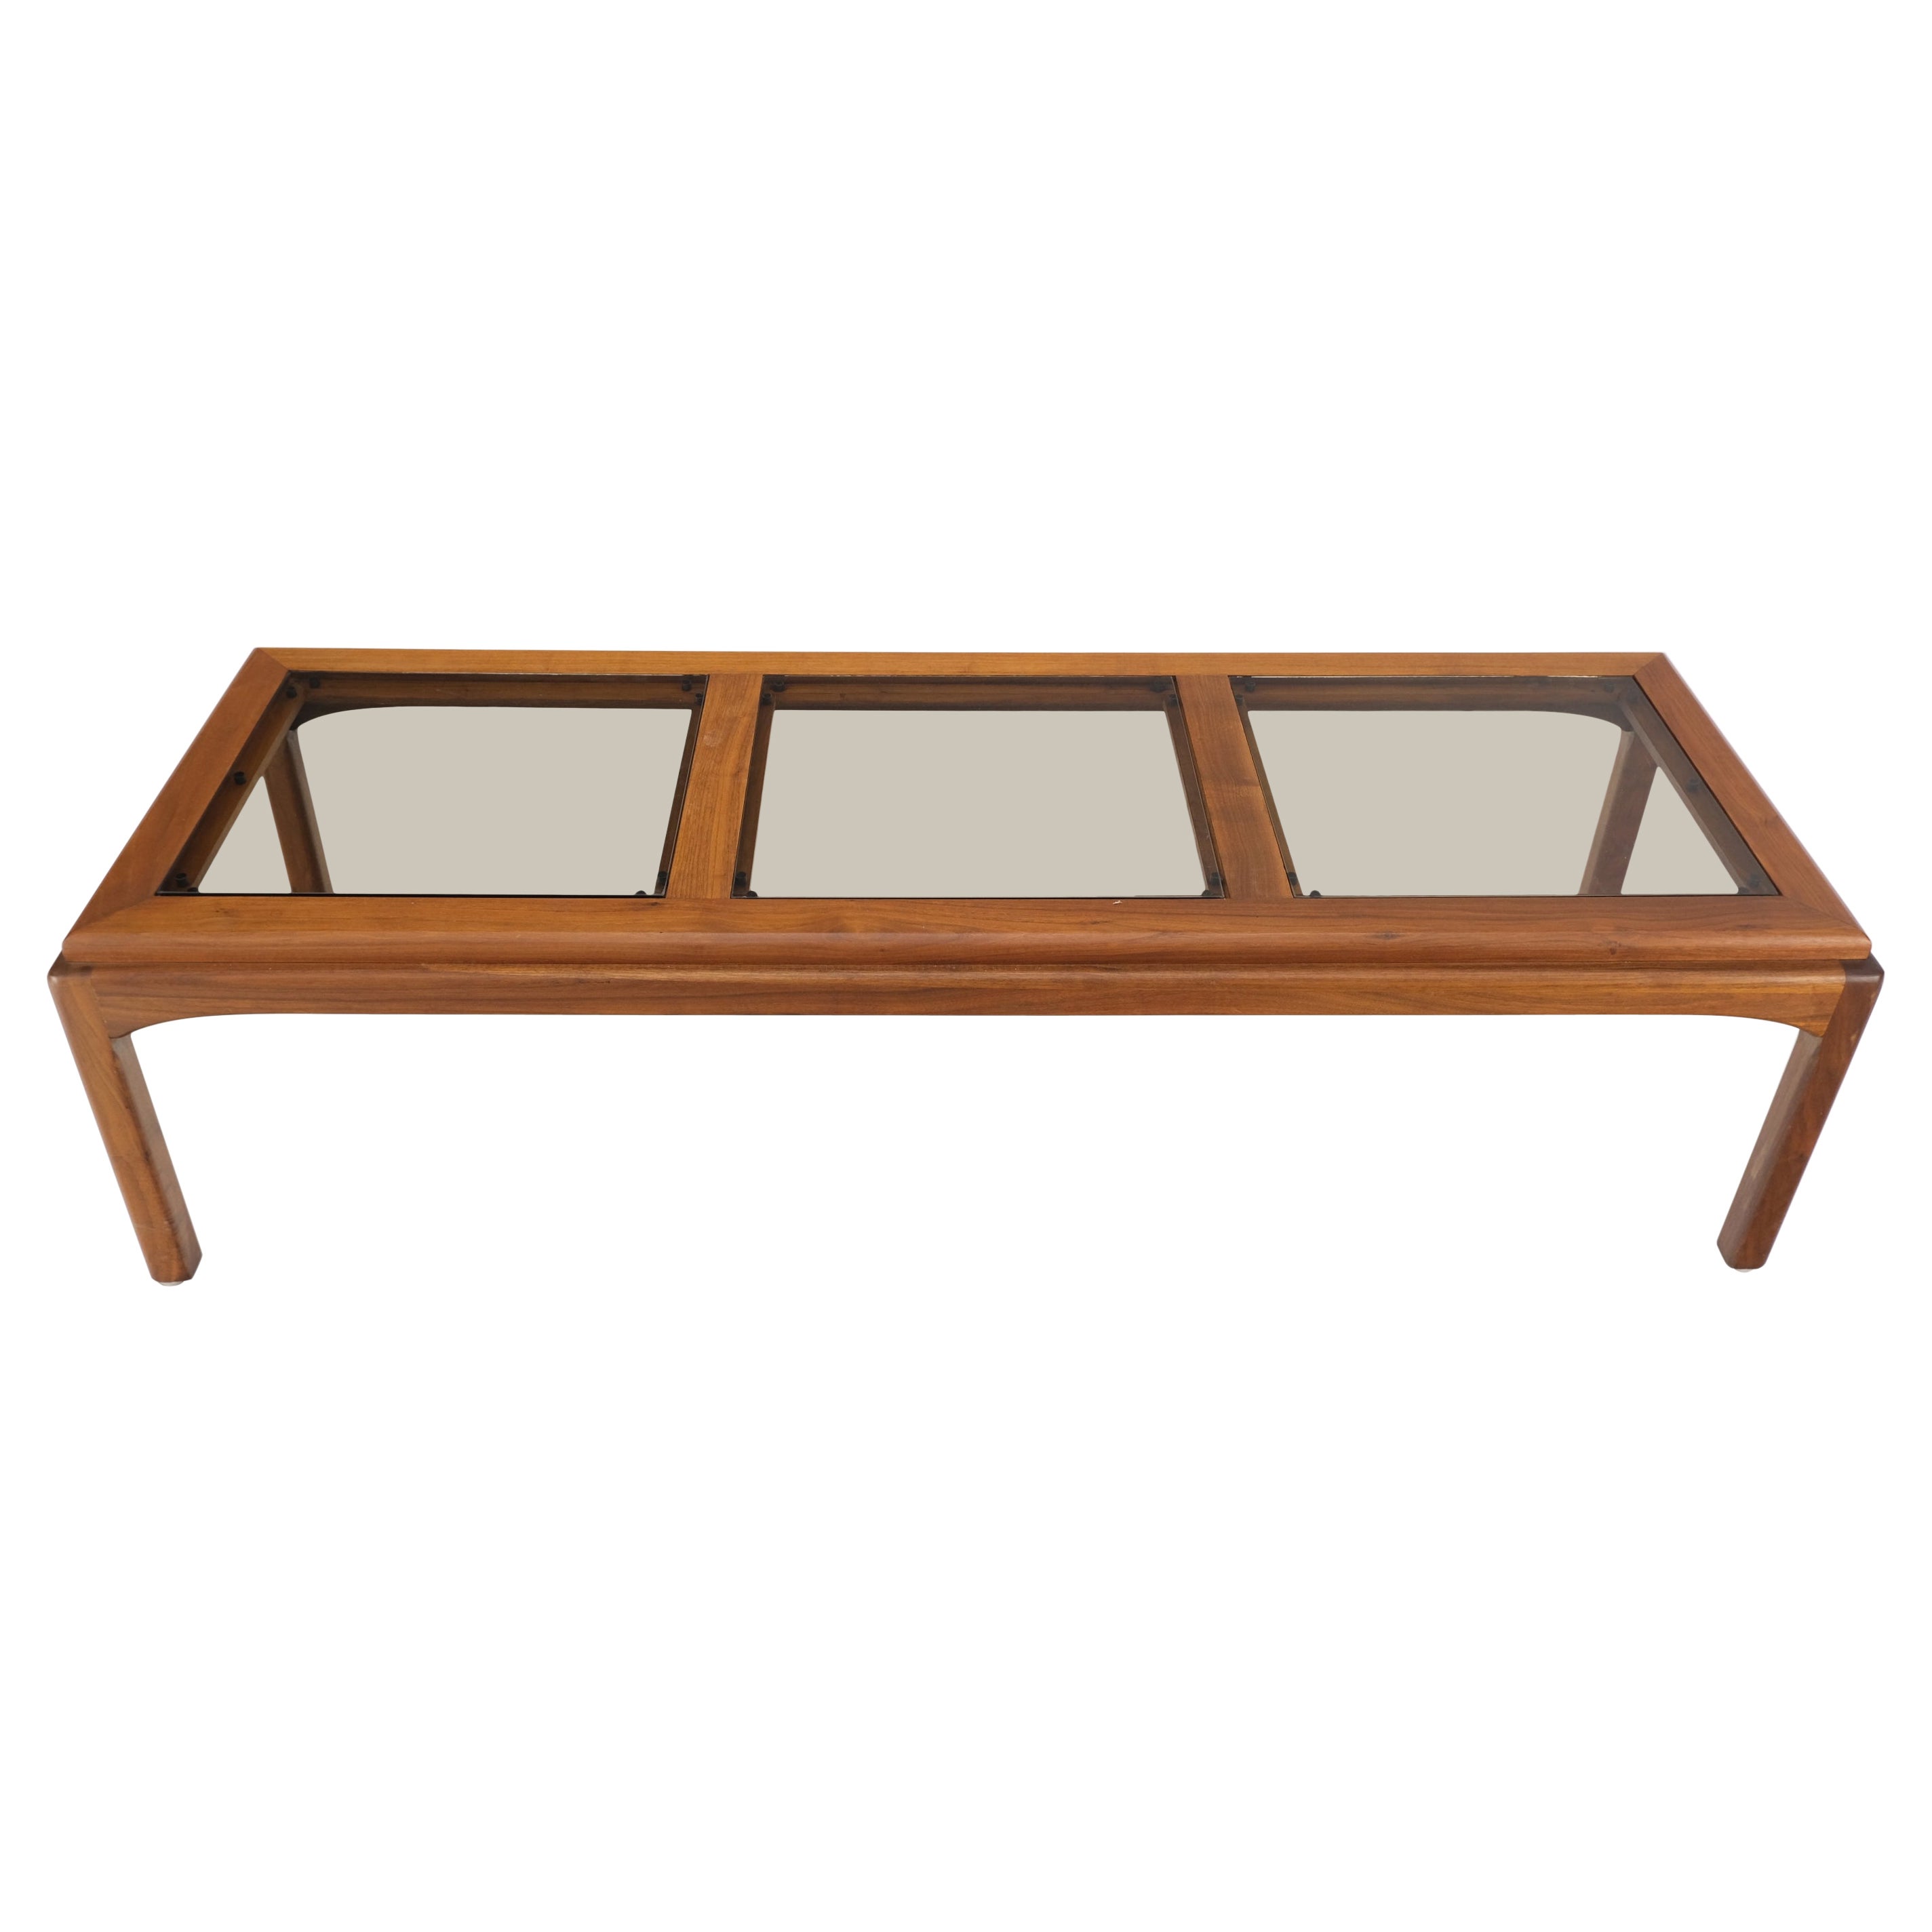 Large Rectangle 3 Smoked Glass Panes Top Solid Oiled Walnut Coffee Table MINT! For Sale